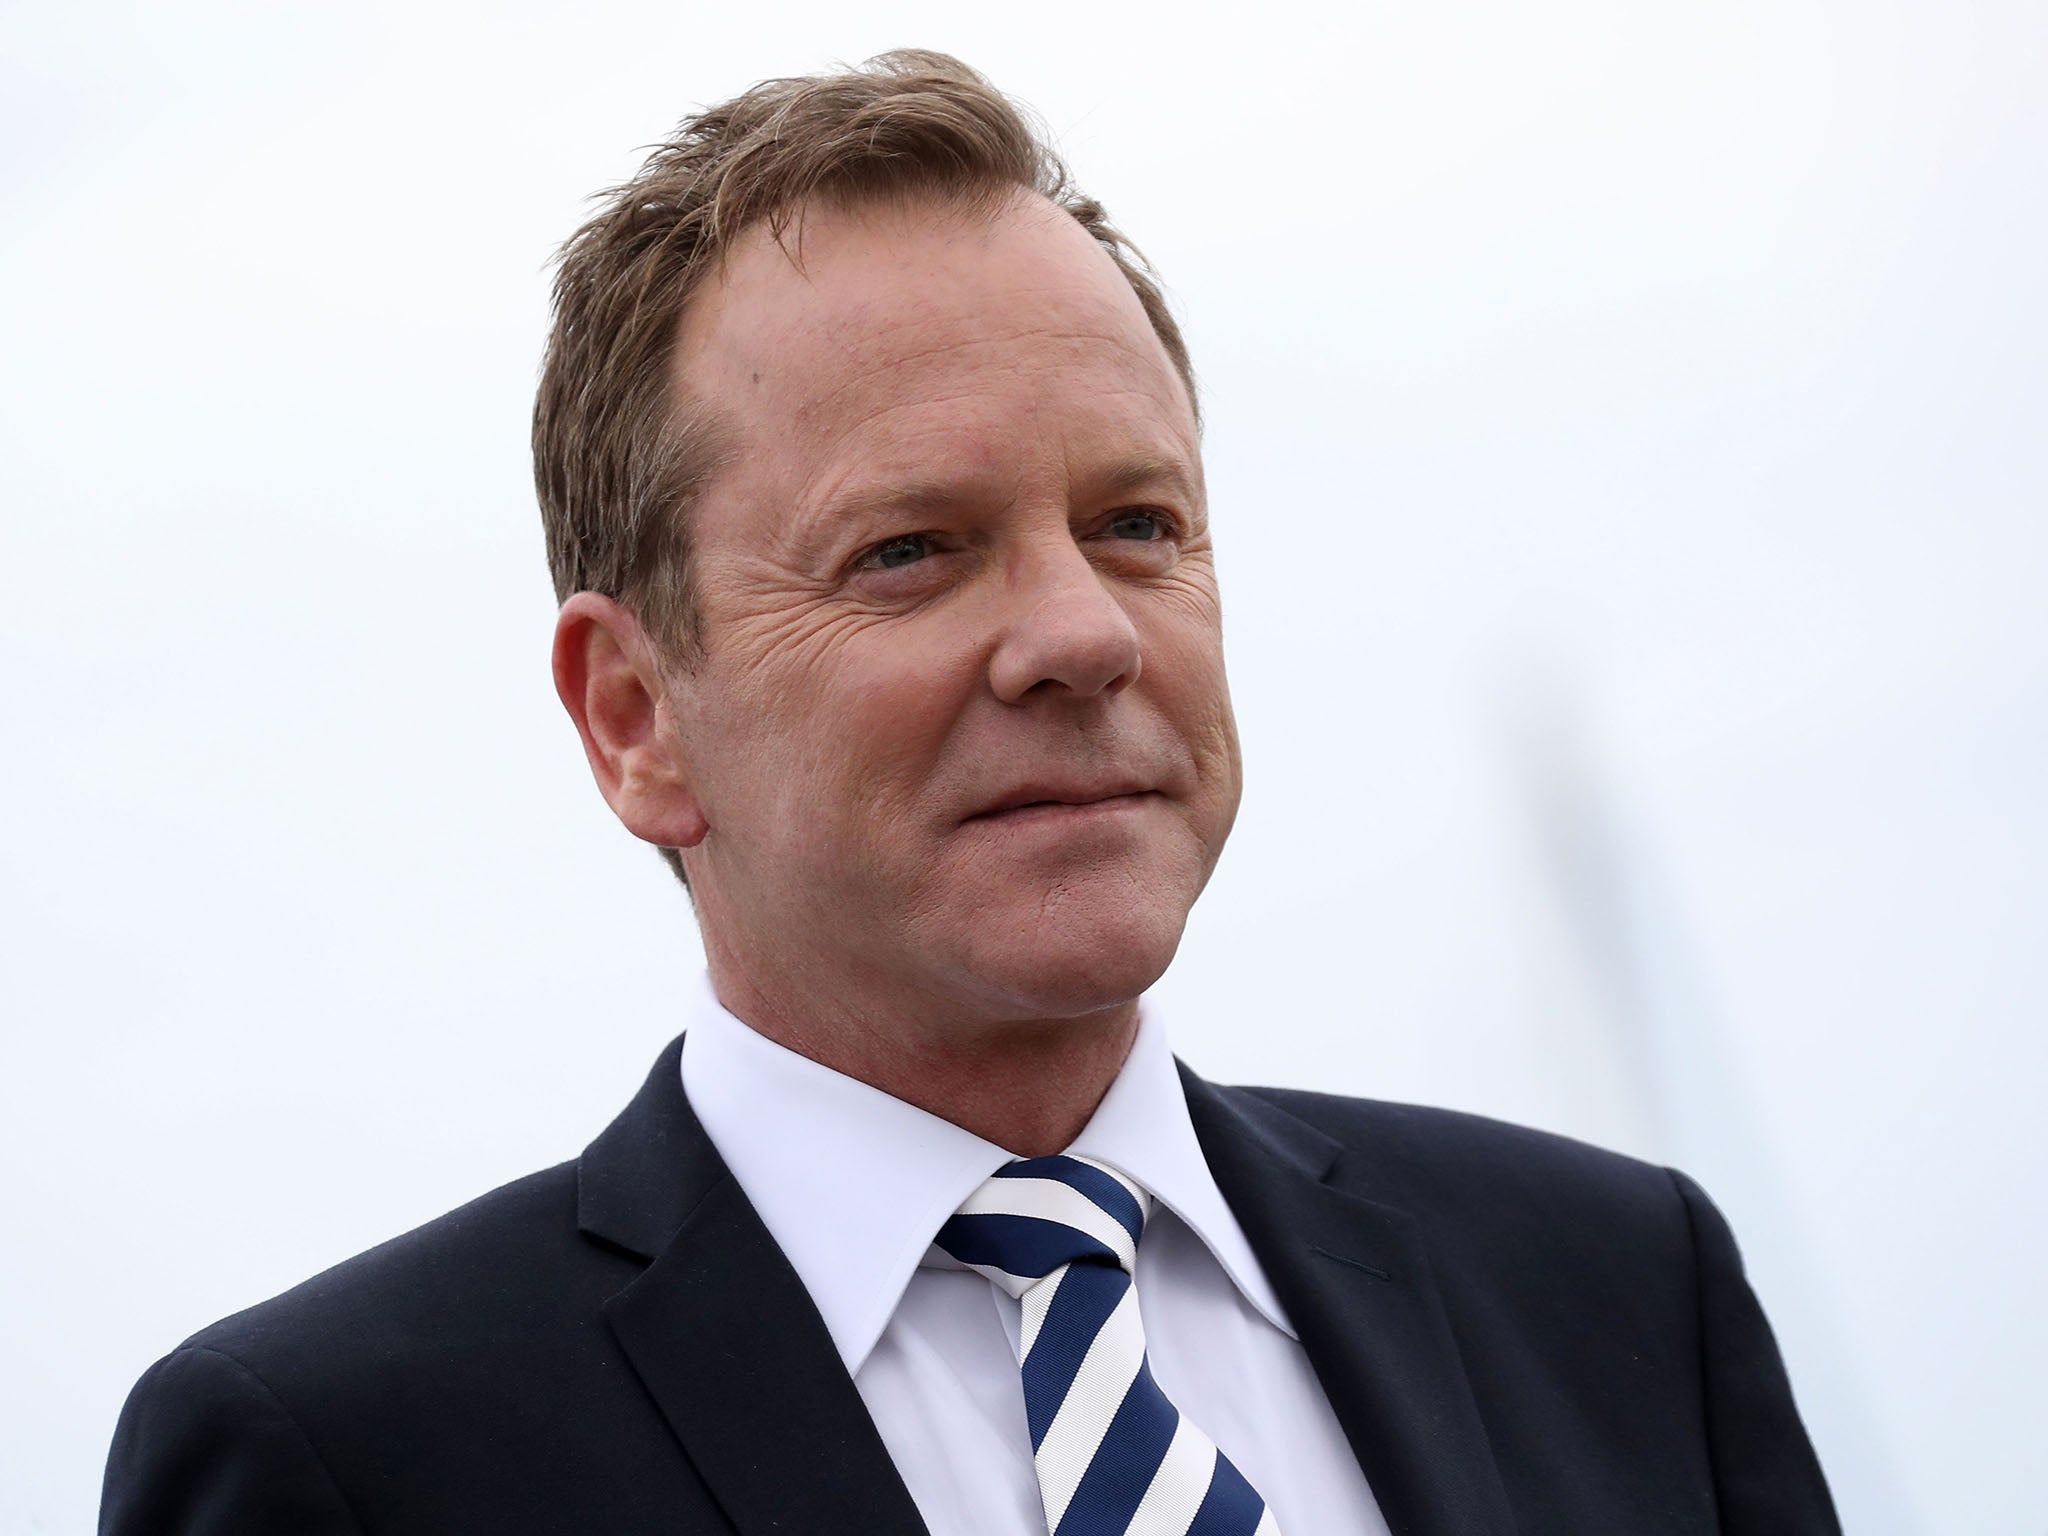 Sutherland plays a secretary of housing and development who suddenly becomes president after a terrorist attack in the new ABC show